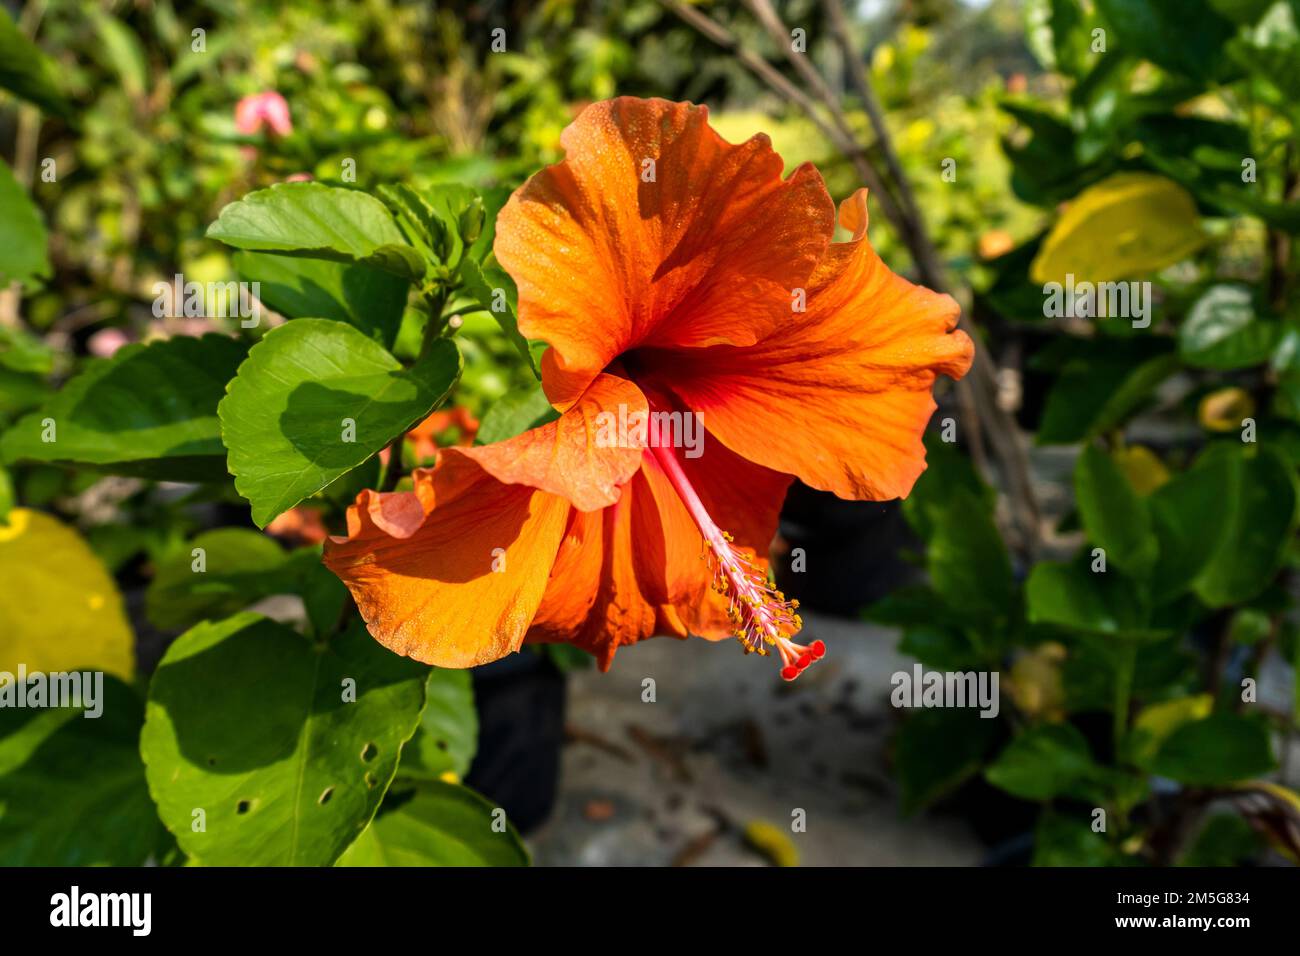 Beautiful young yellow hibiscus flowers, blurred background of leaves Stock Photo